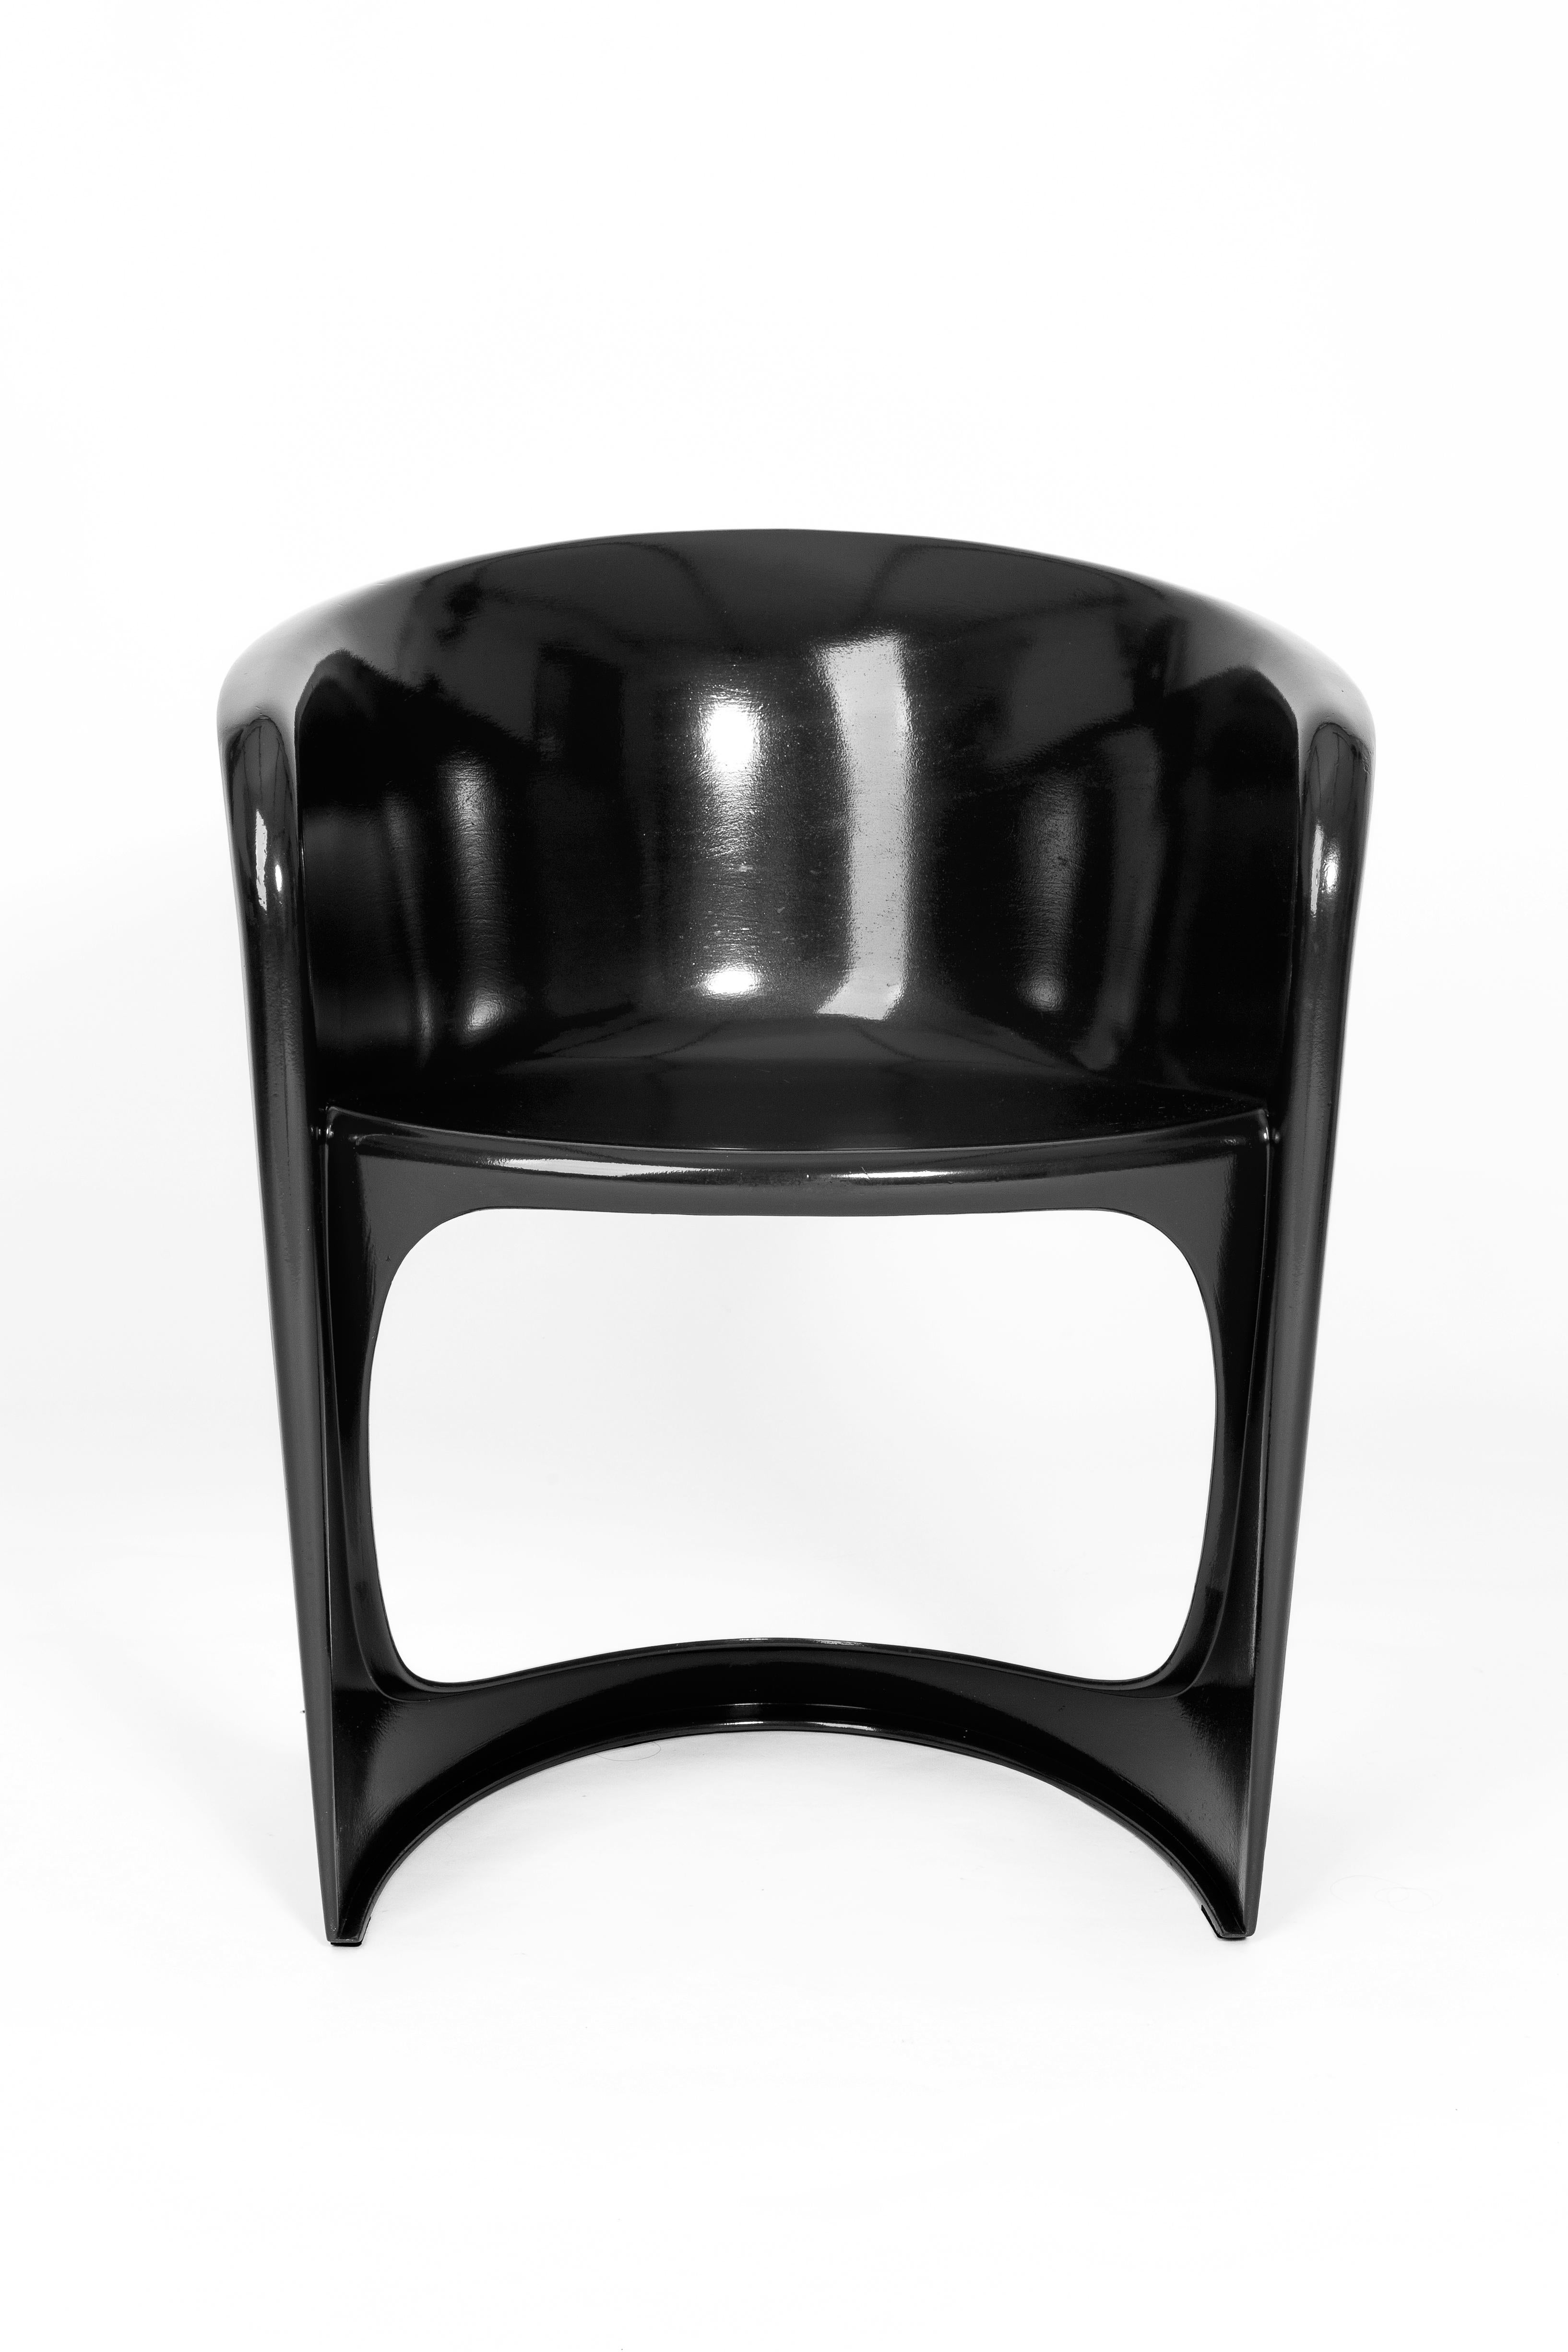 Set of Four Black Glossy Cado Chairs, Steen Østergaard, 1974 In Excellent Condition For Sale In 05-080 Hornowek, PL